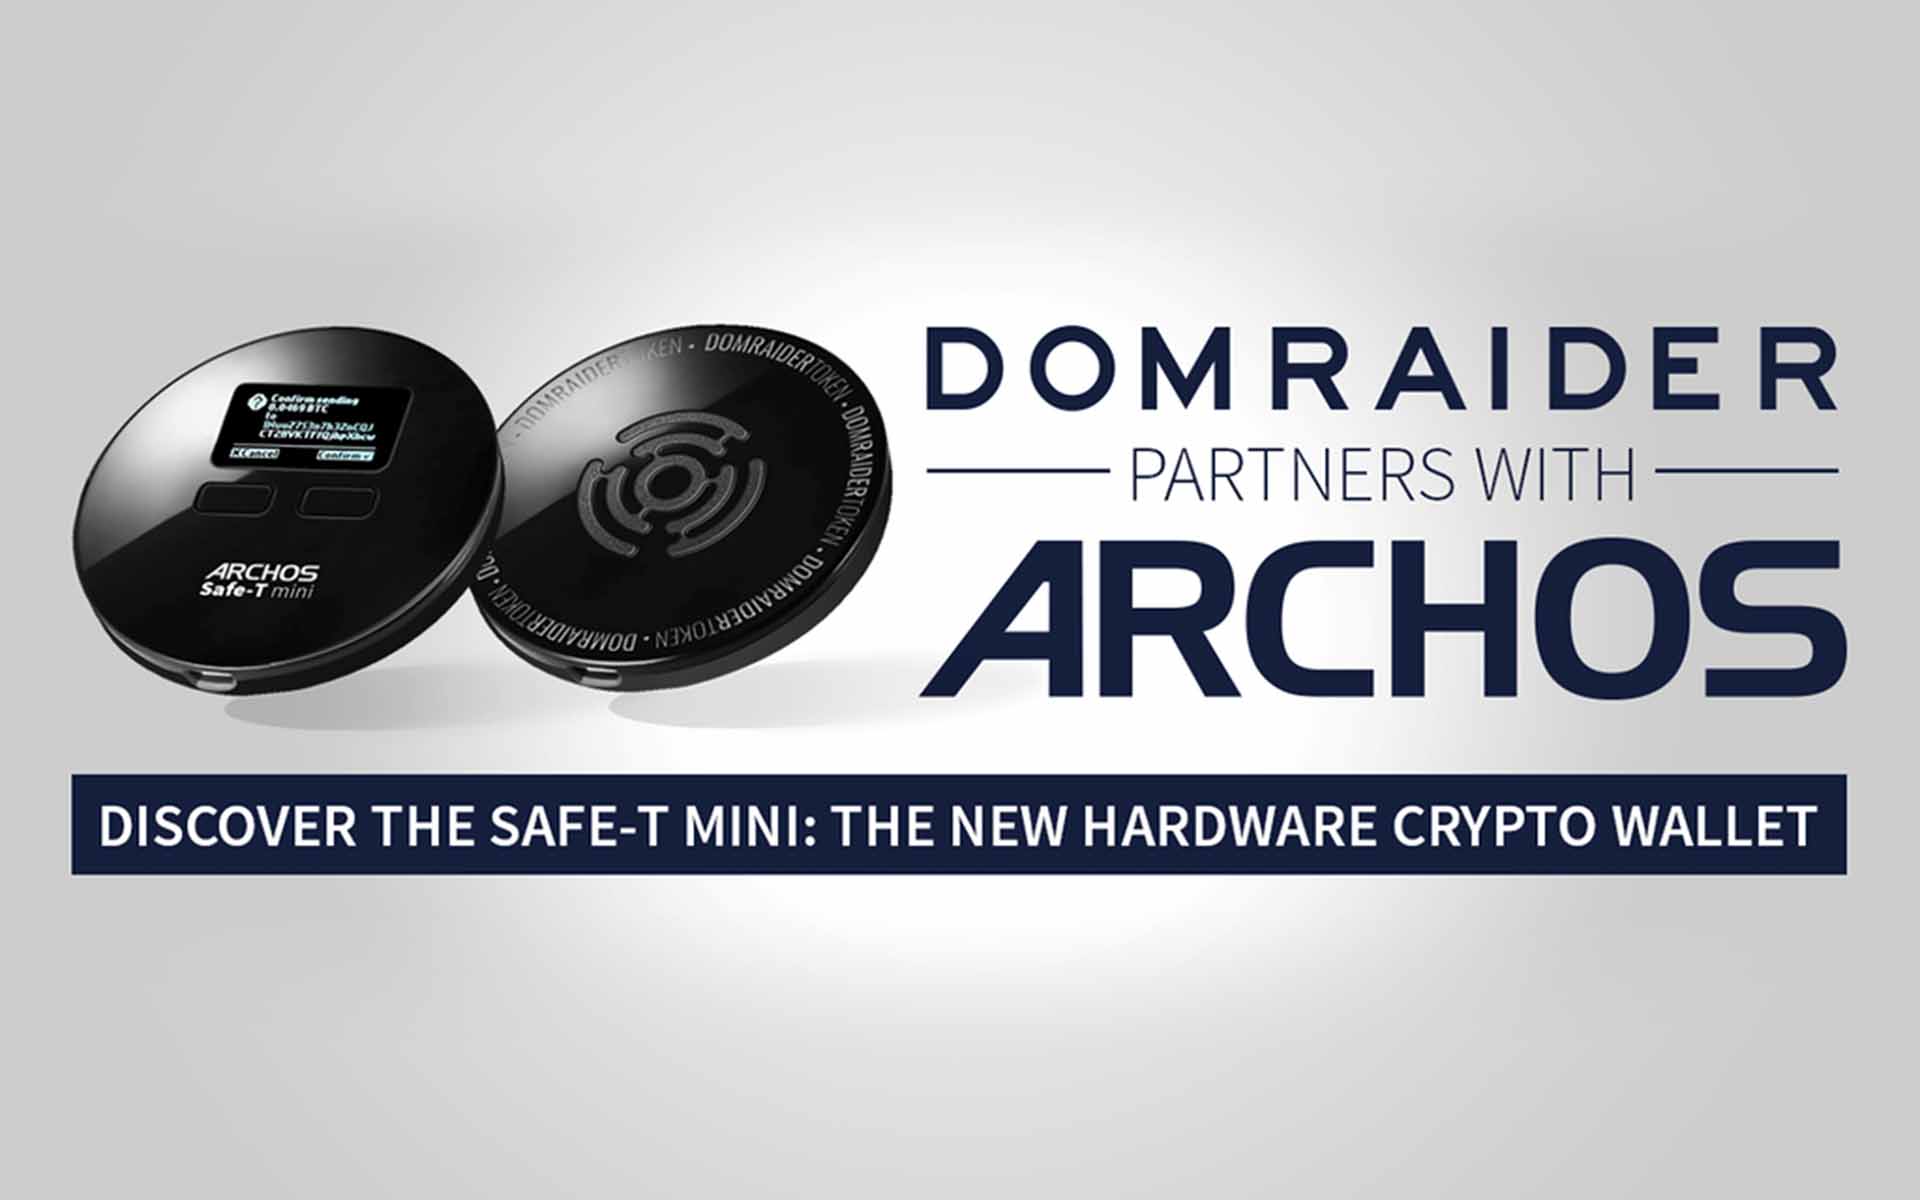 Safe-T Mini, the First Hardware Wallet for Cryptocurrencies by Archos and Its Brand New Partner: Domraider!